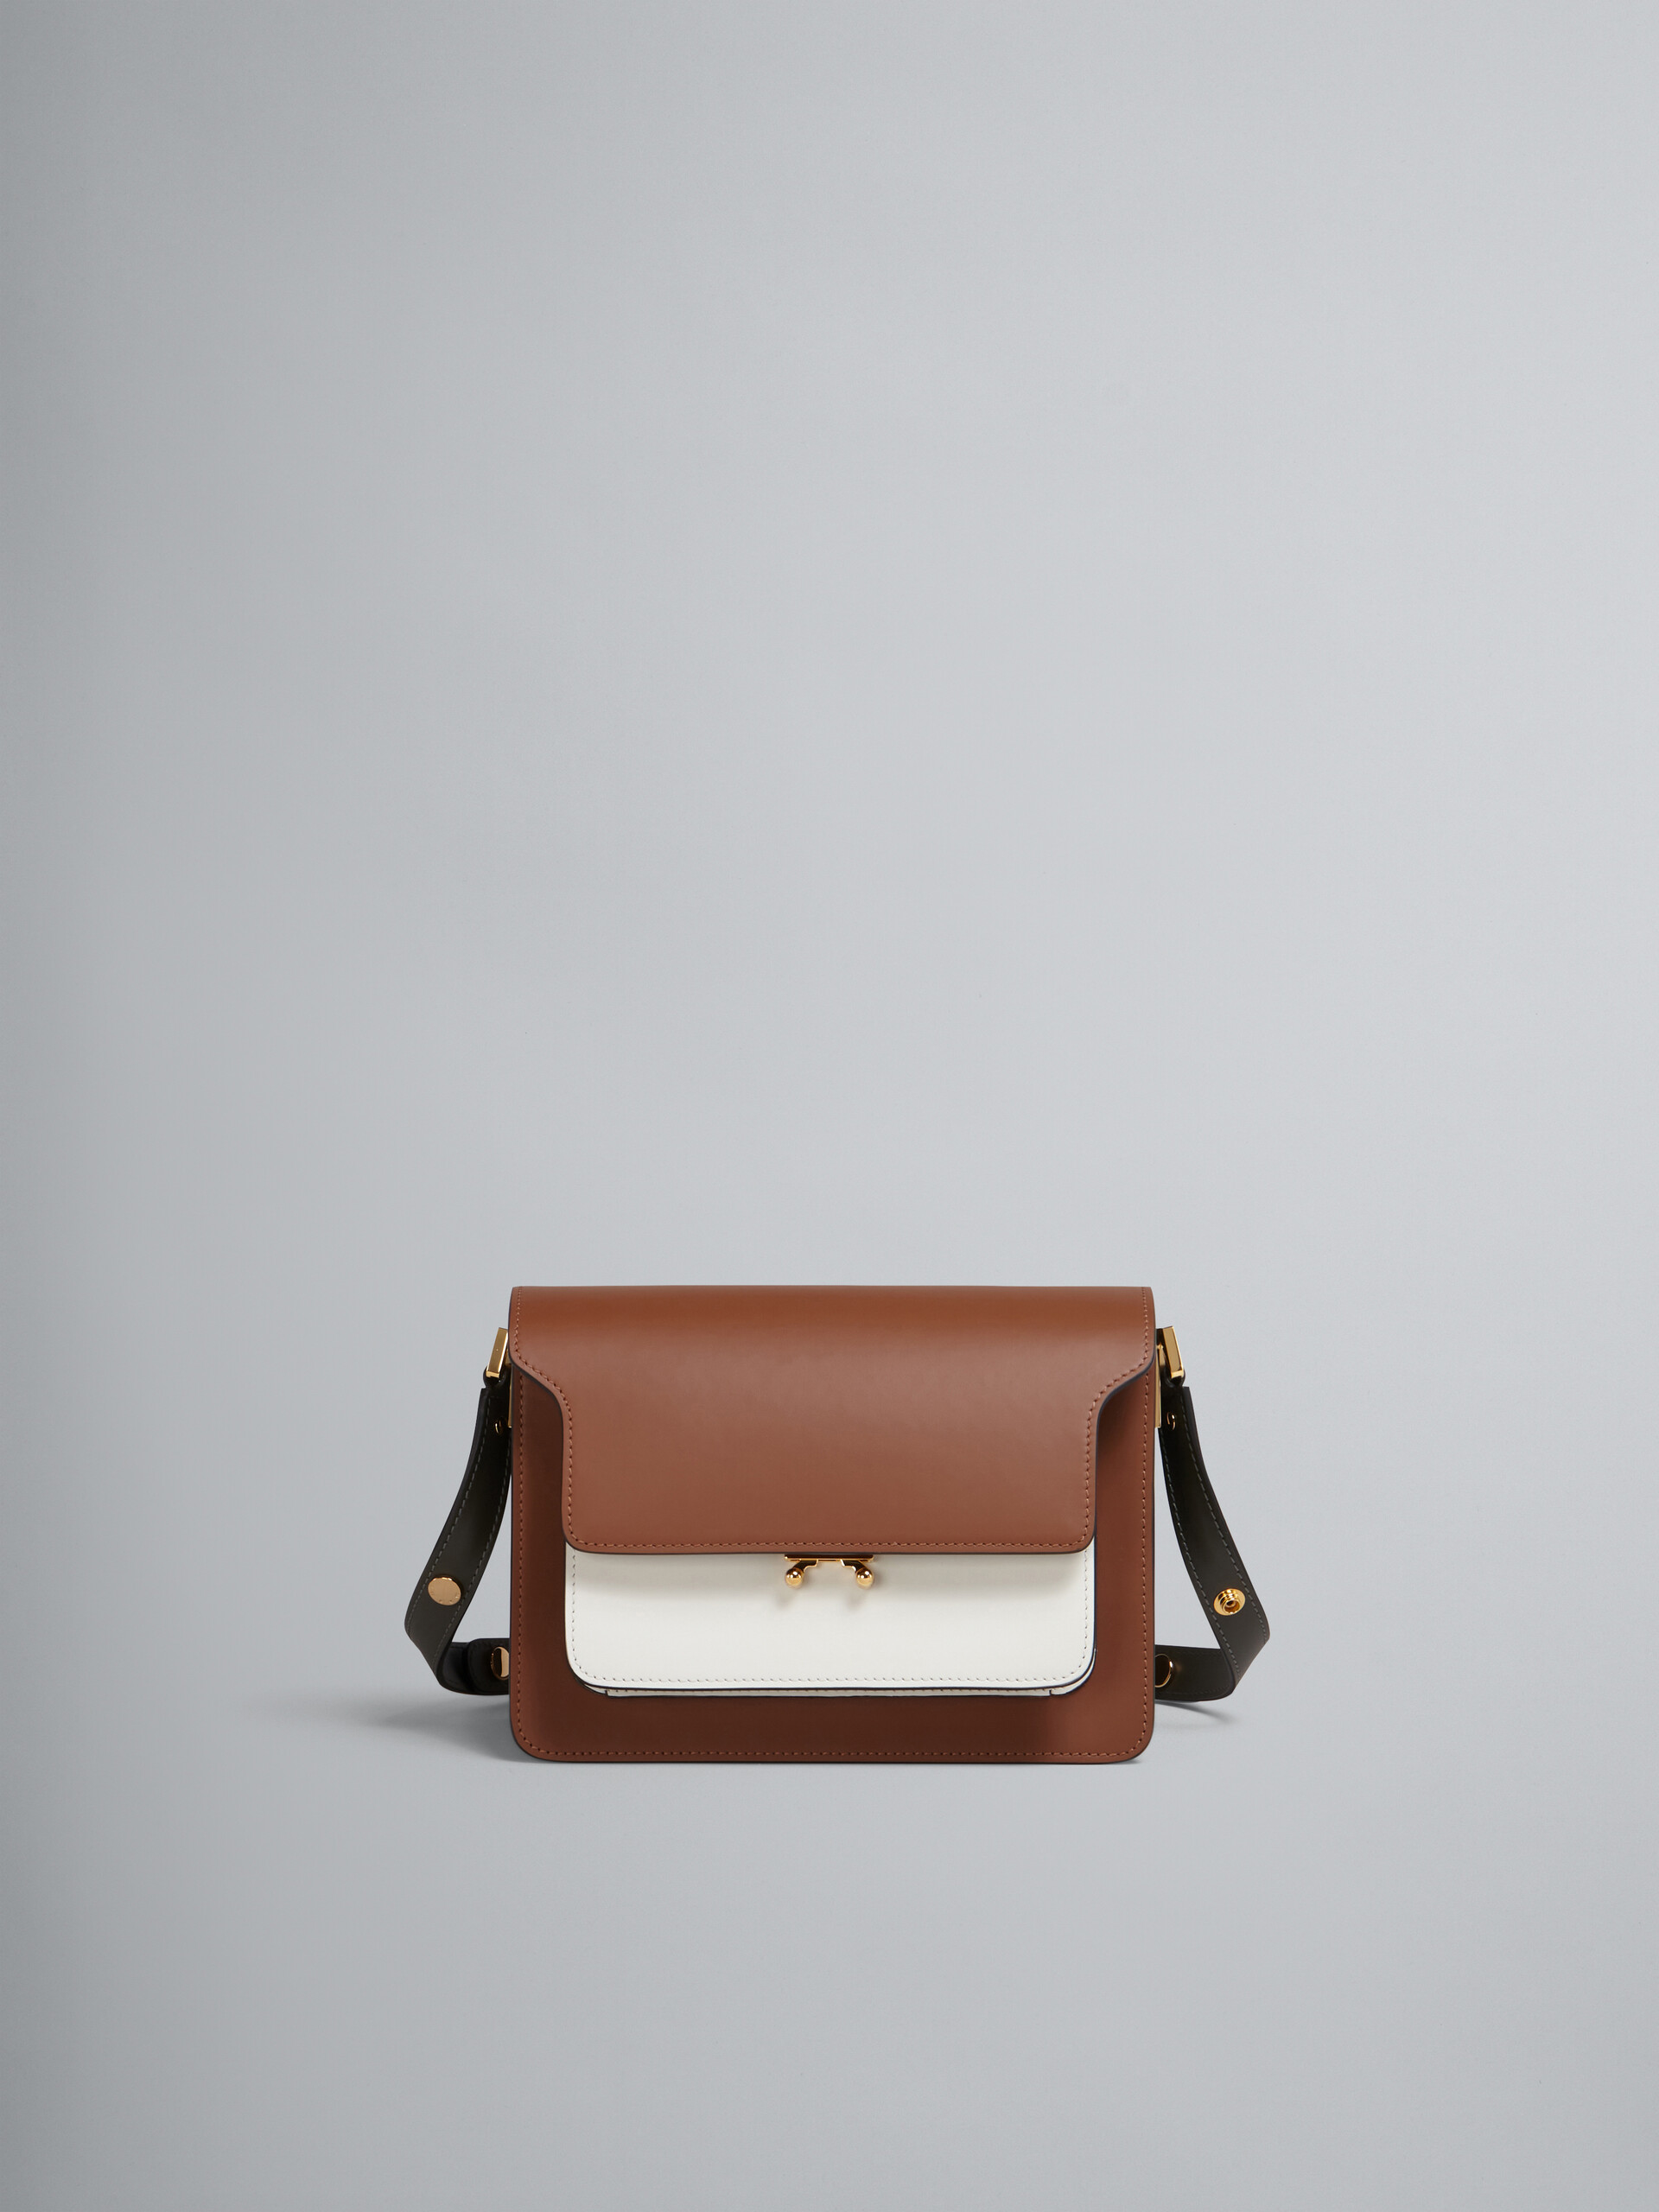 TRUNK media bag in brown white and green leather